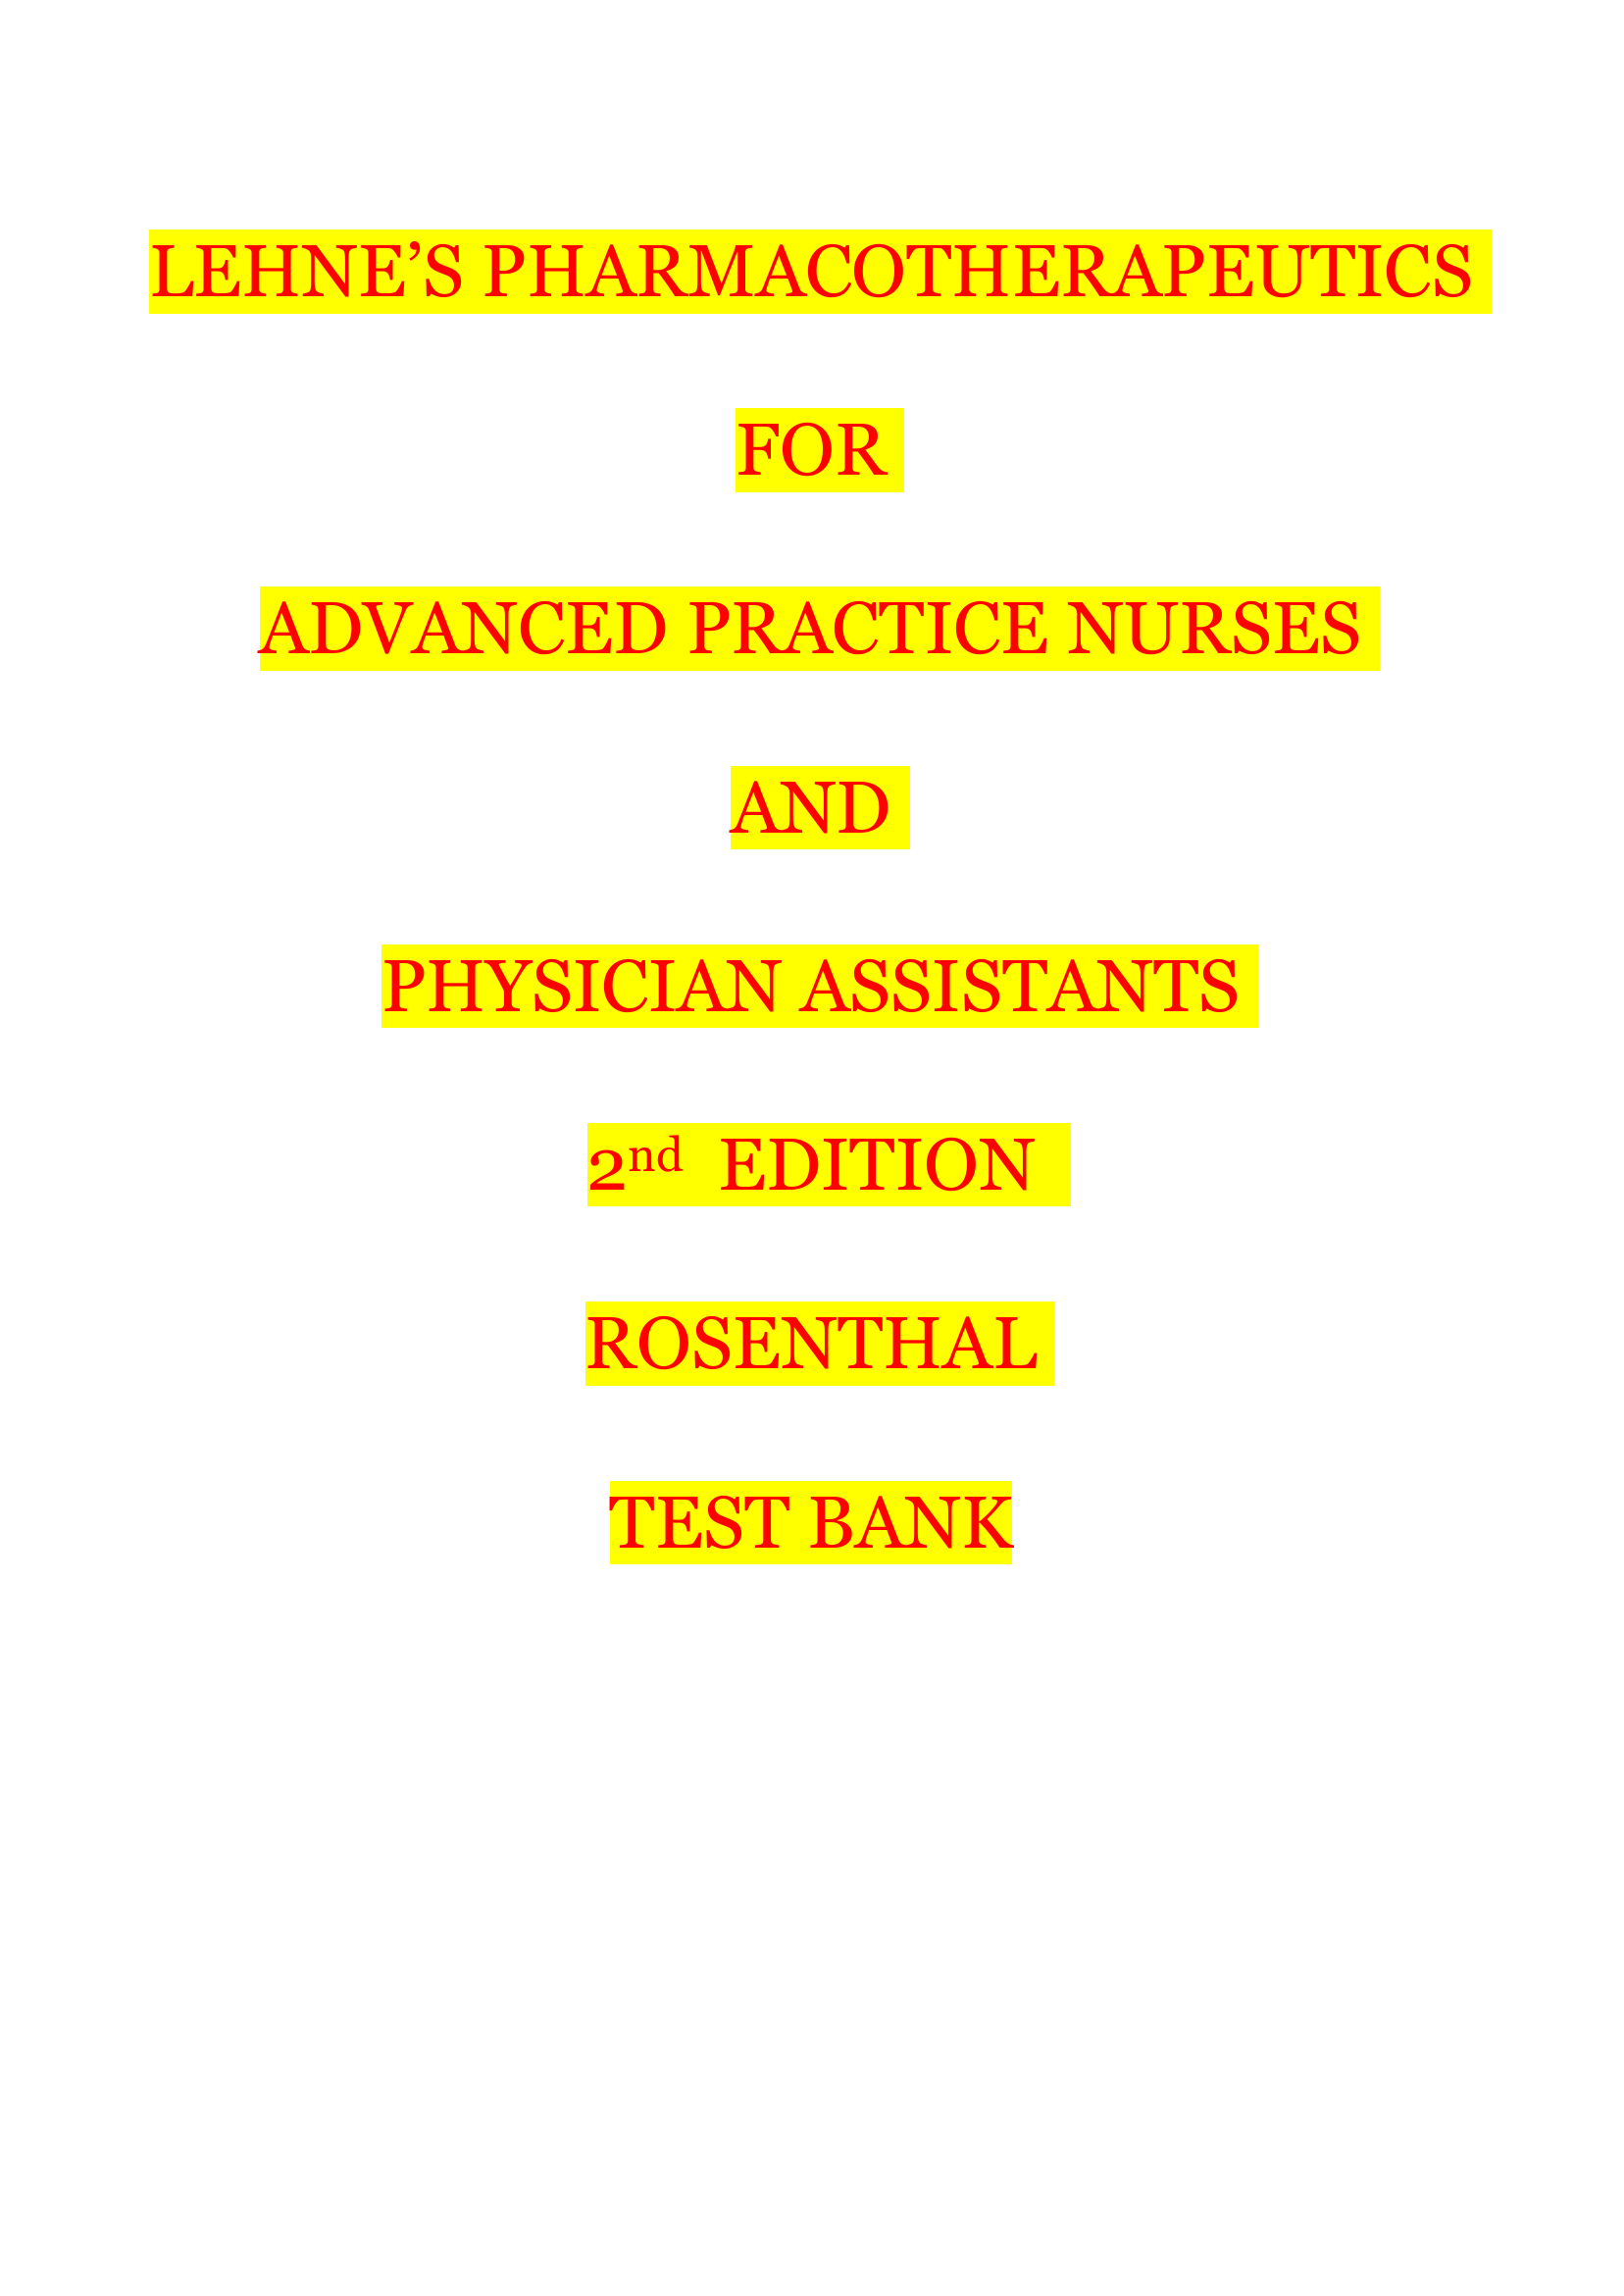 Lehne’s Pharmacotherapeutics For Advanced Practice Nurses And Physician Assistants